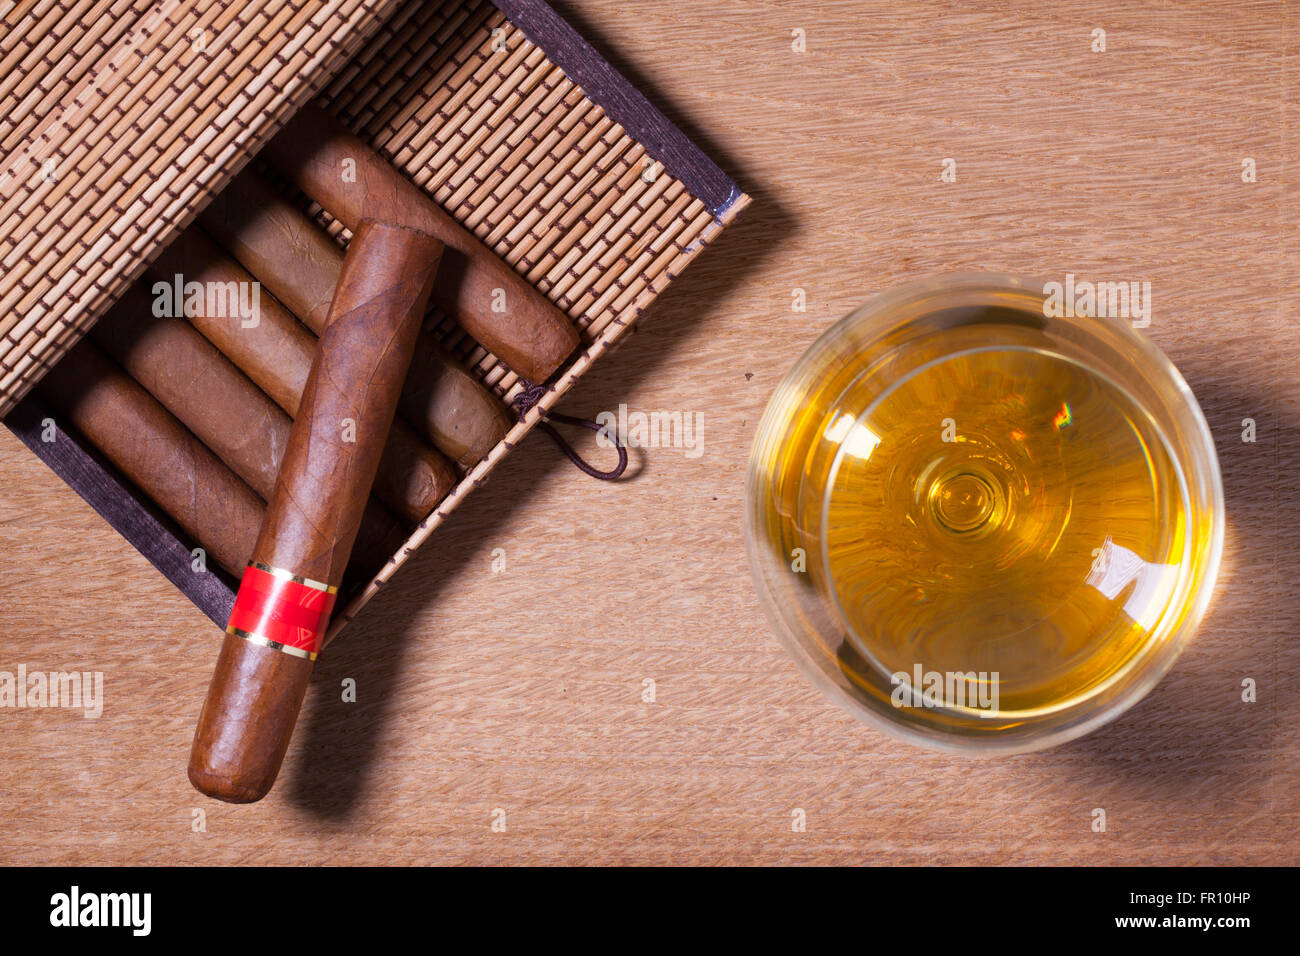 Luxury Cuban cigars on the wooden table Stock Photo